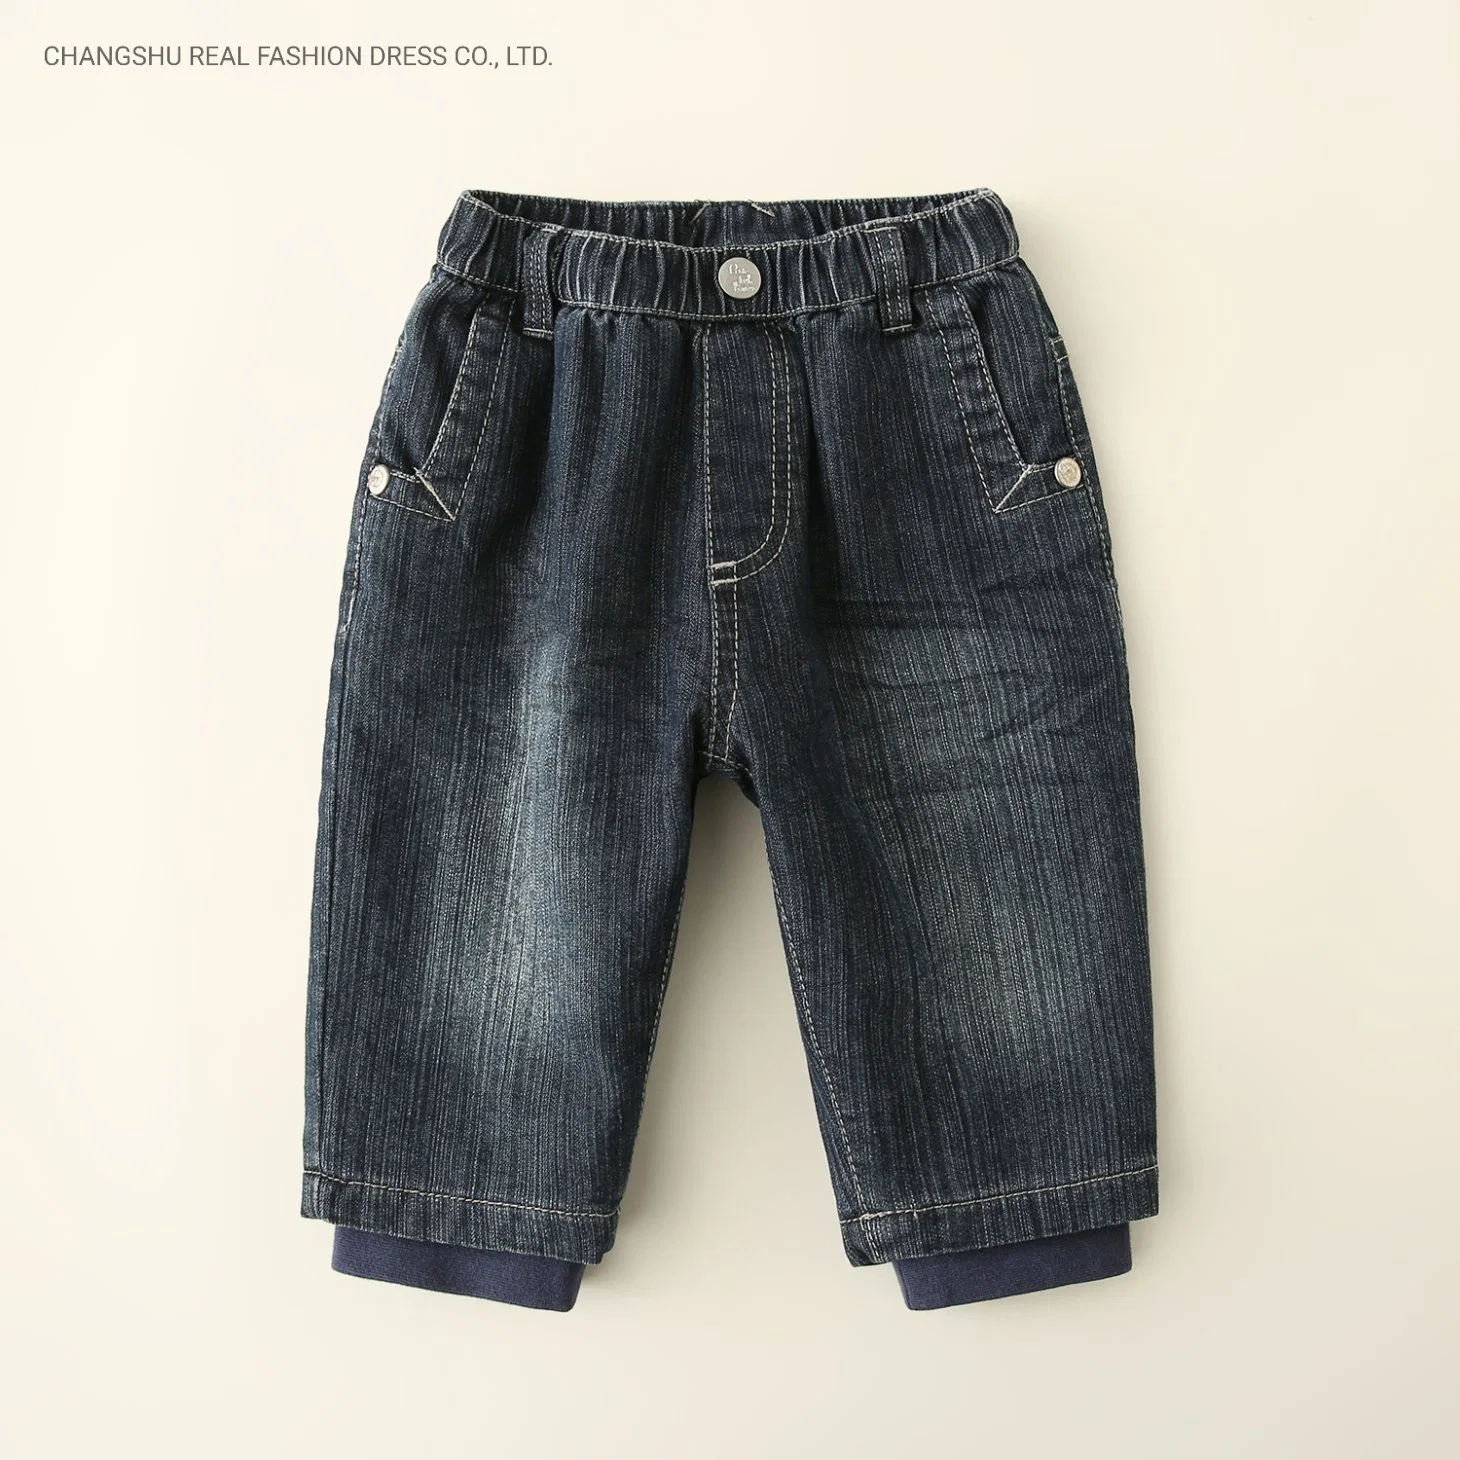 Boy Kids Denim Pant Clothes with Elastic Waistband and Silver Metal Snap at Pocket and Rib for Hem